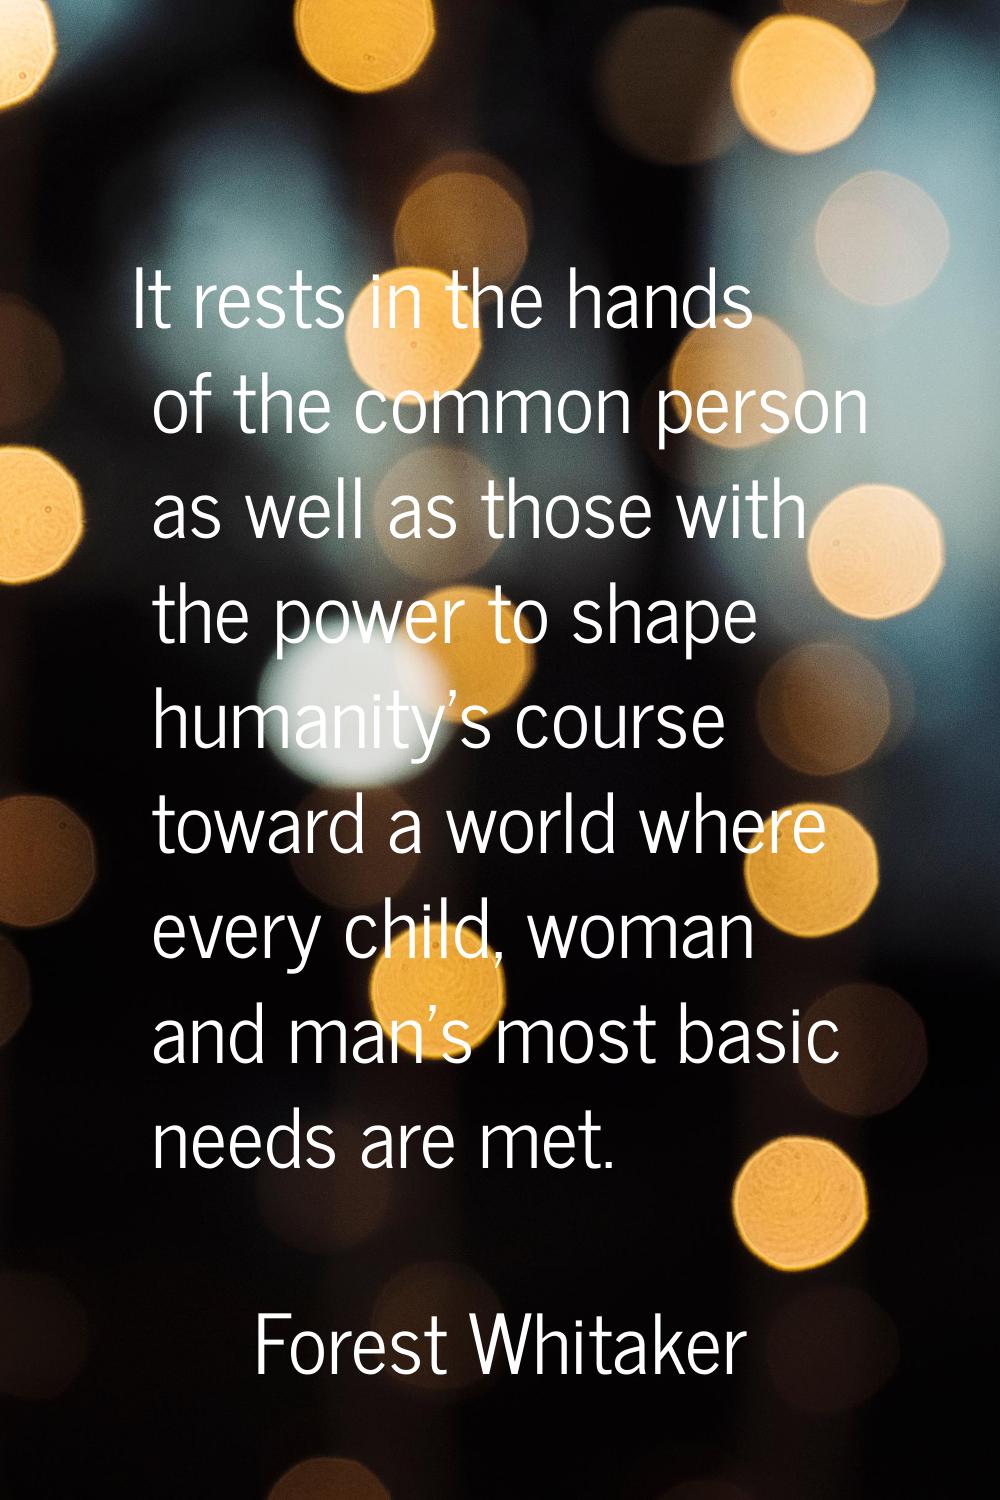 It rests in the hands of the common person as well as those with the power to shape humanity's cour